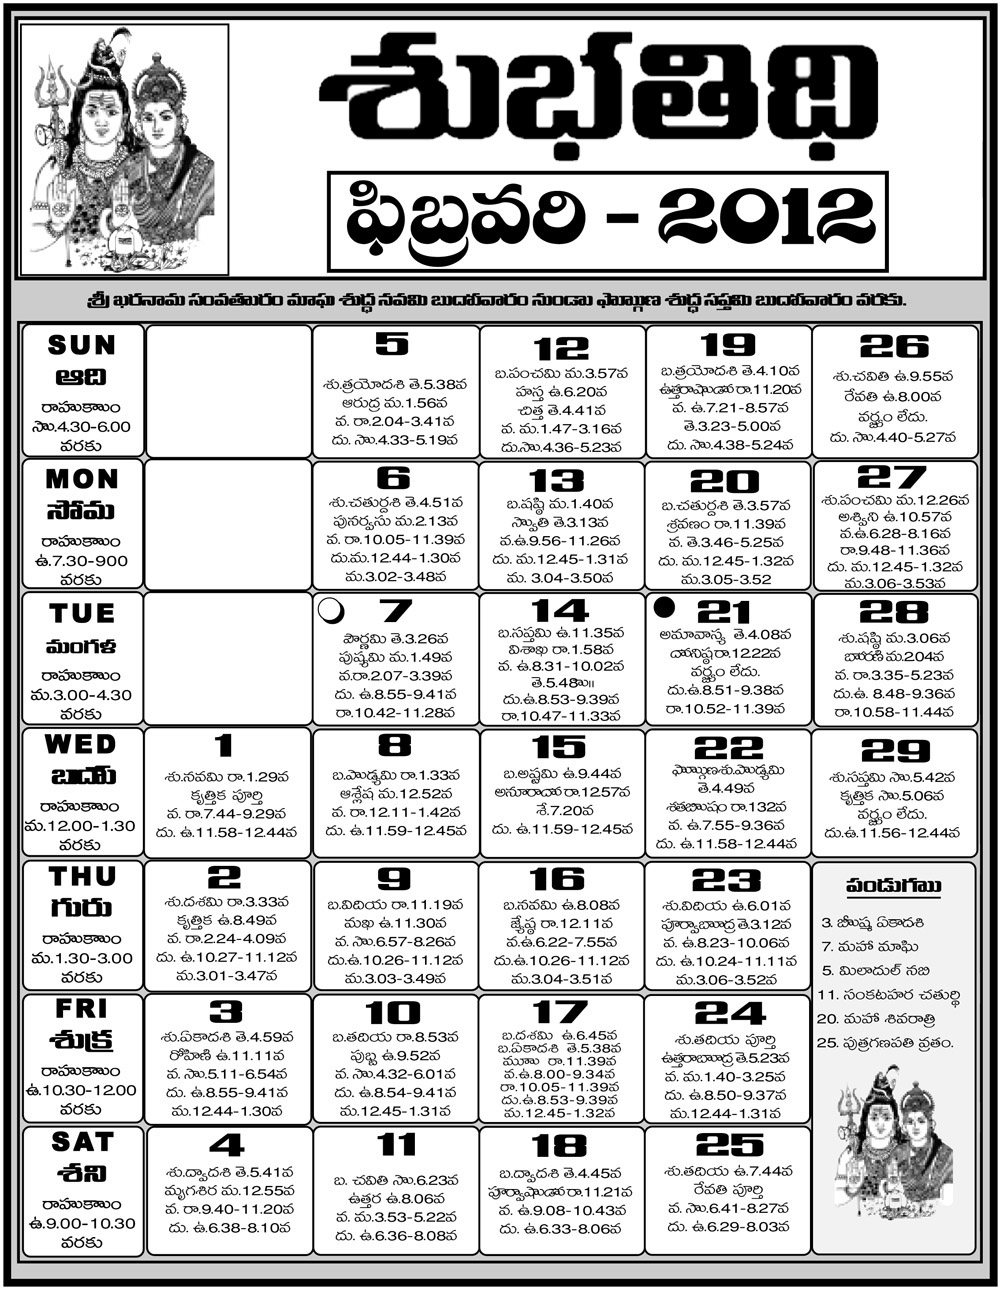 Telugu Calendar 2012 | Telugu Calendar 2011 | Telugu Calendar 2010 in Hindu Calendar With Tithi 2012 March